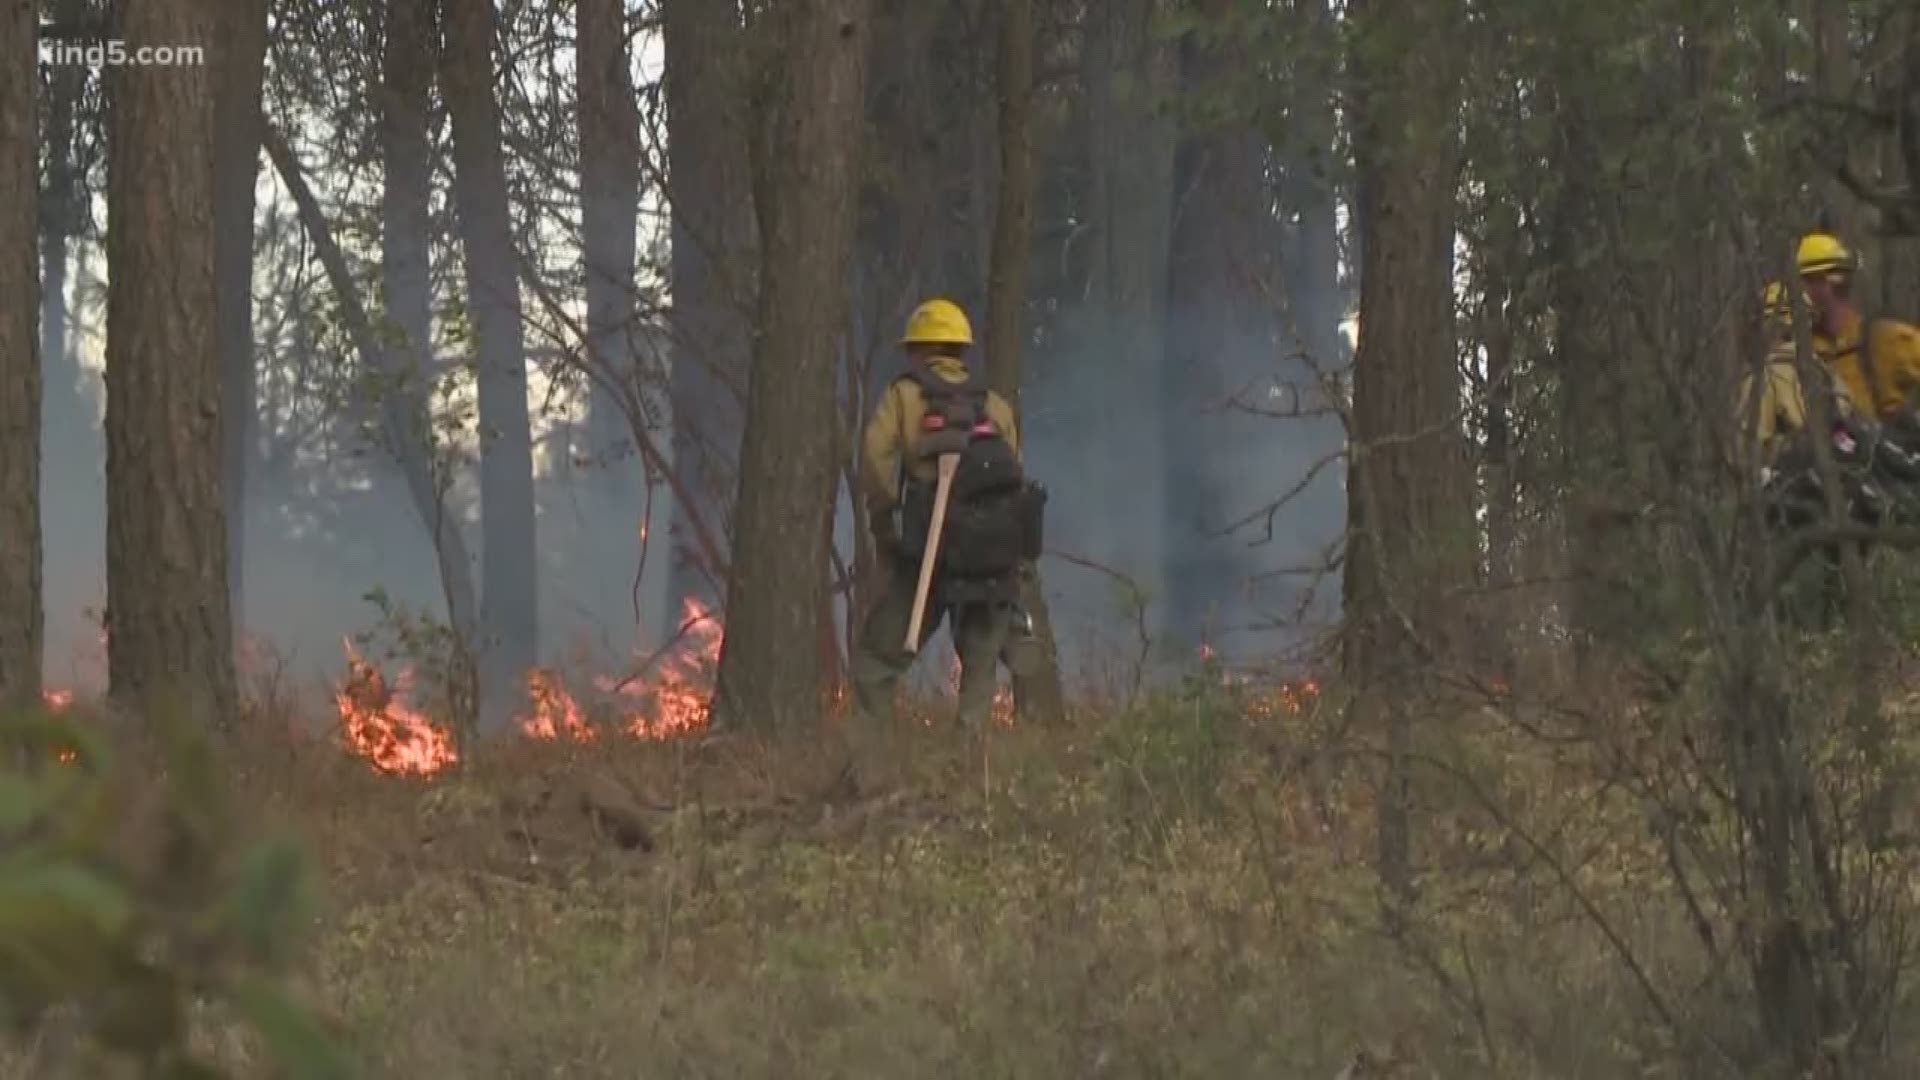 There is growing concern over wildfires in western Washington after an exceptionally early start to the season. KING 5's Glenn Farley shows how crews are battling the changing landscape of wildfires.